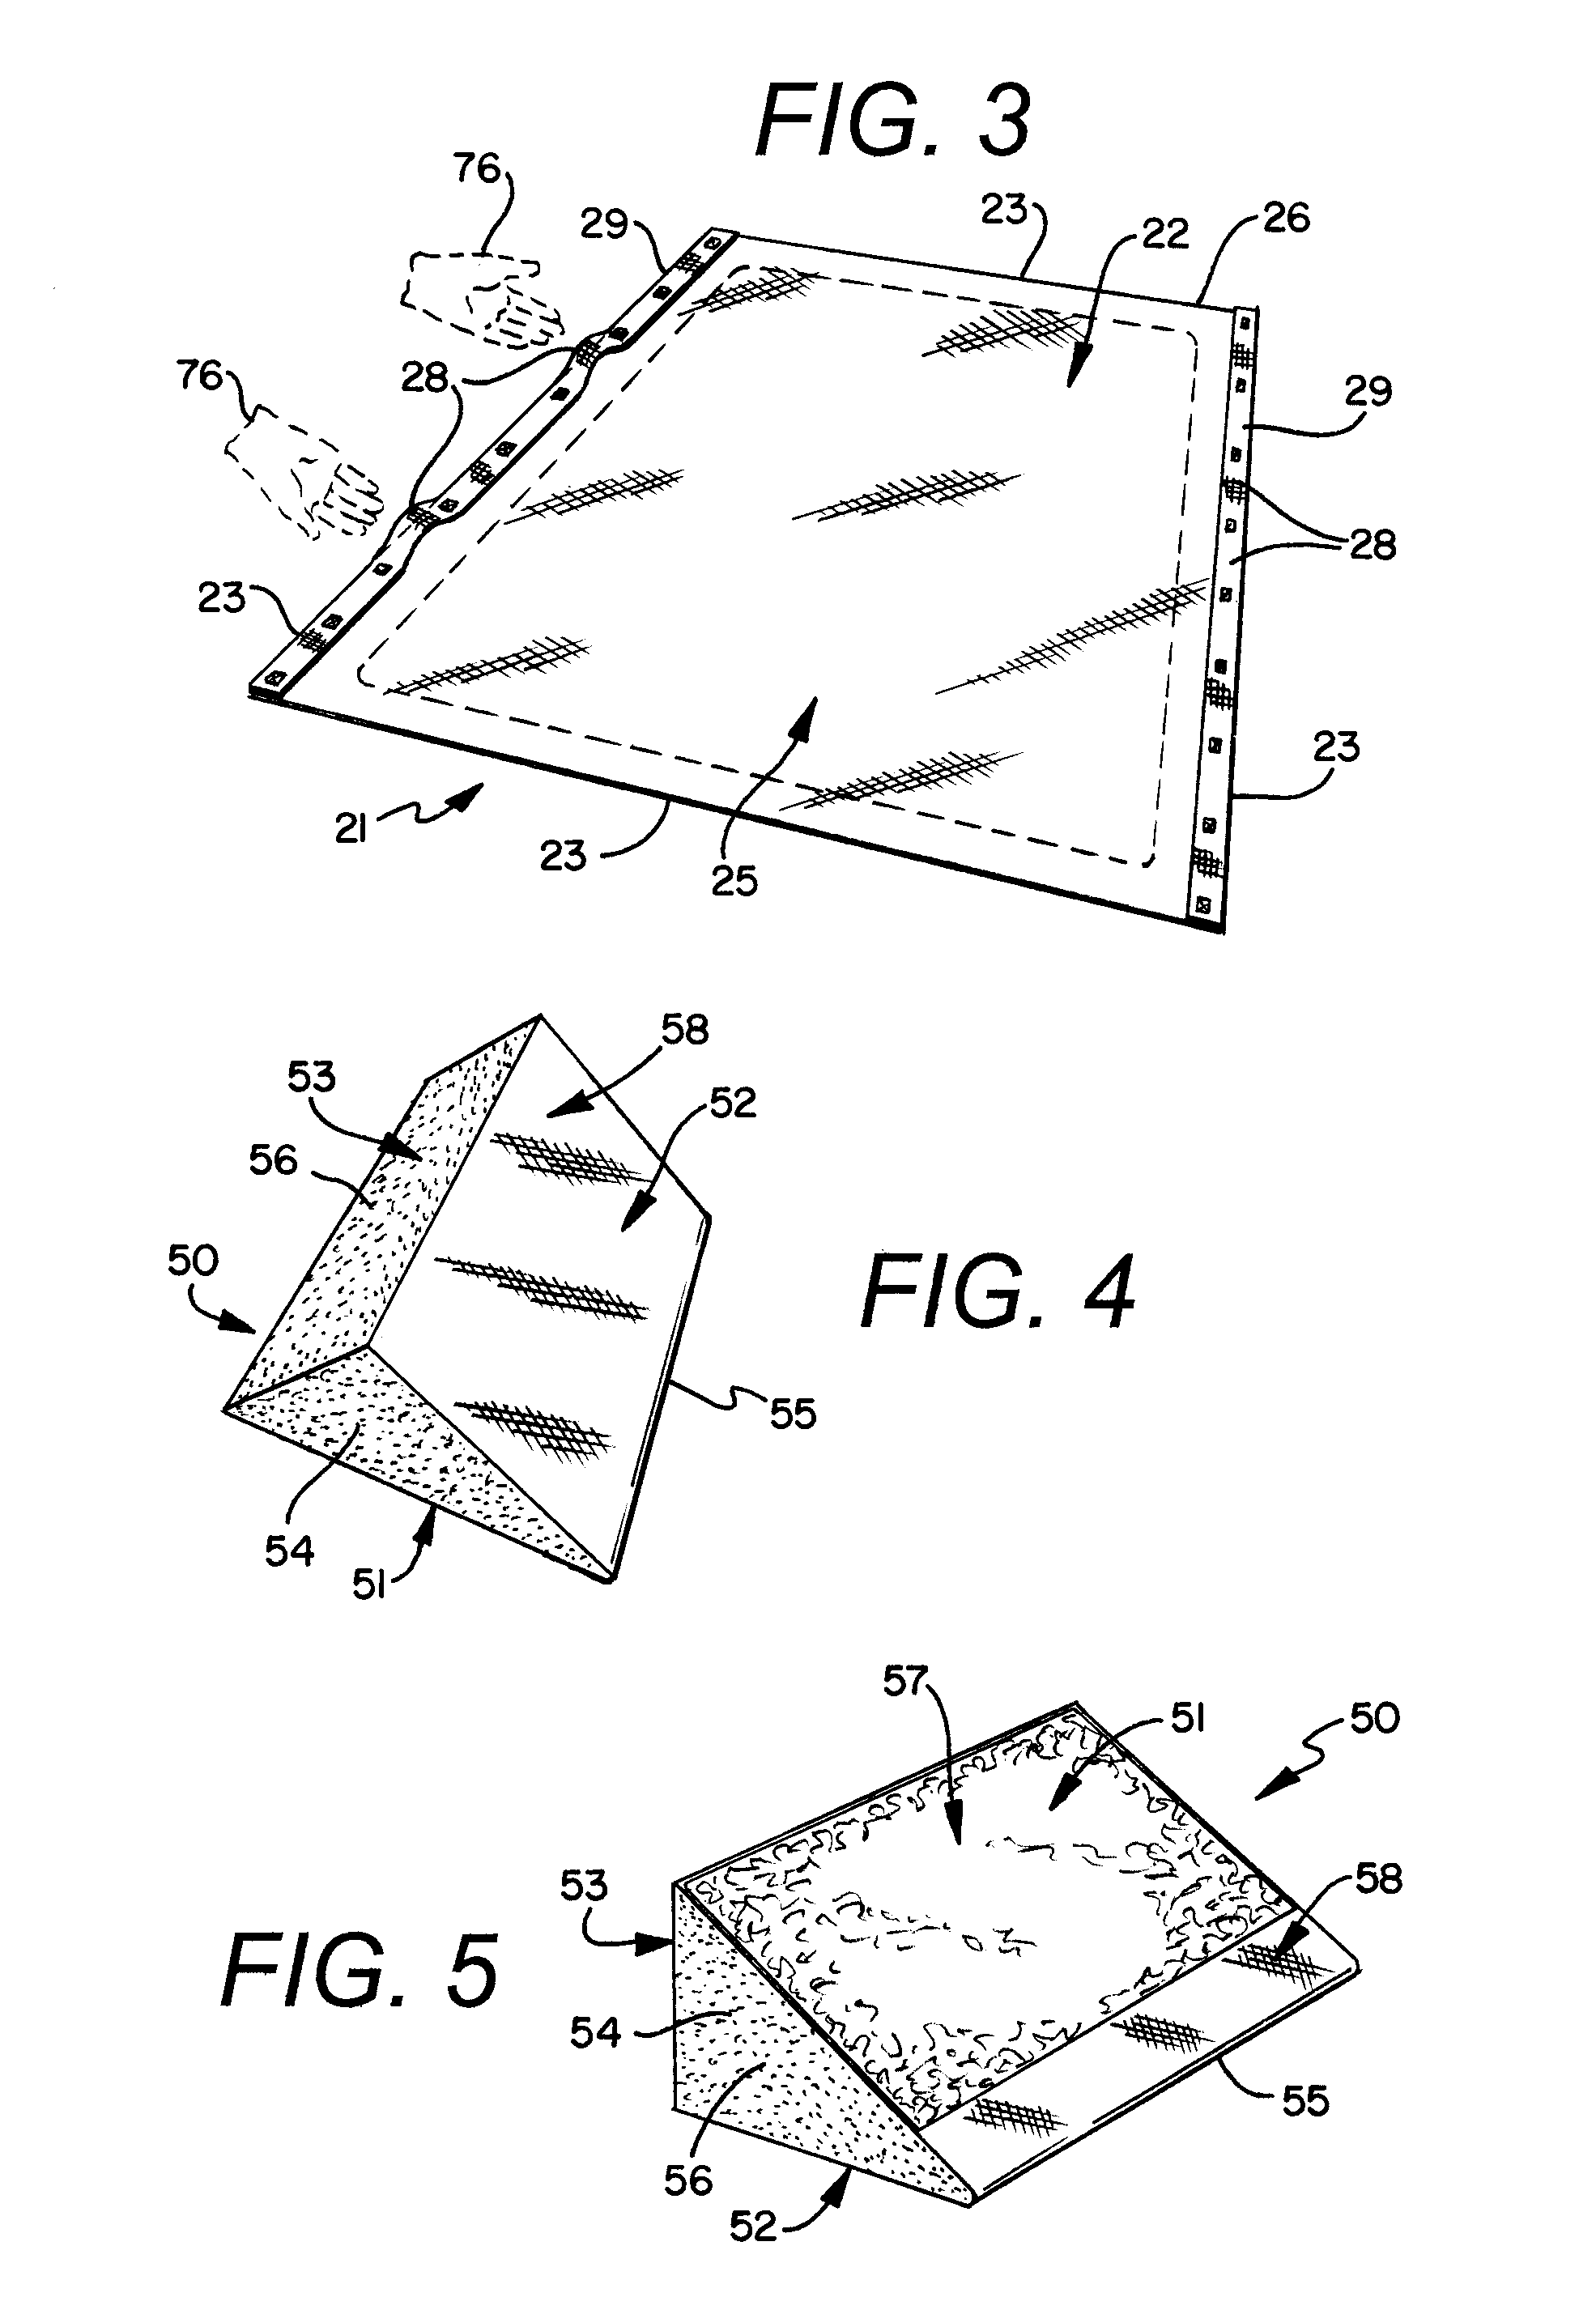 Method for turning and positioning a patient